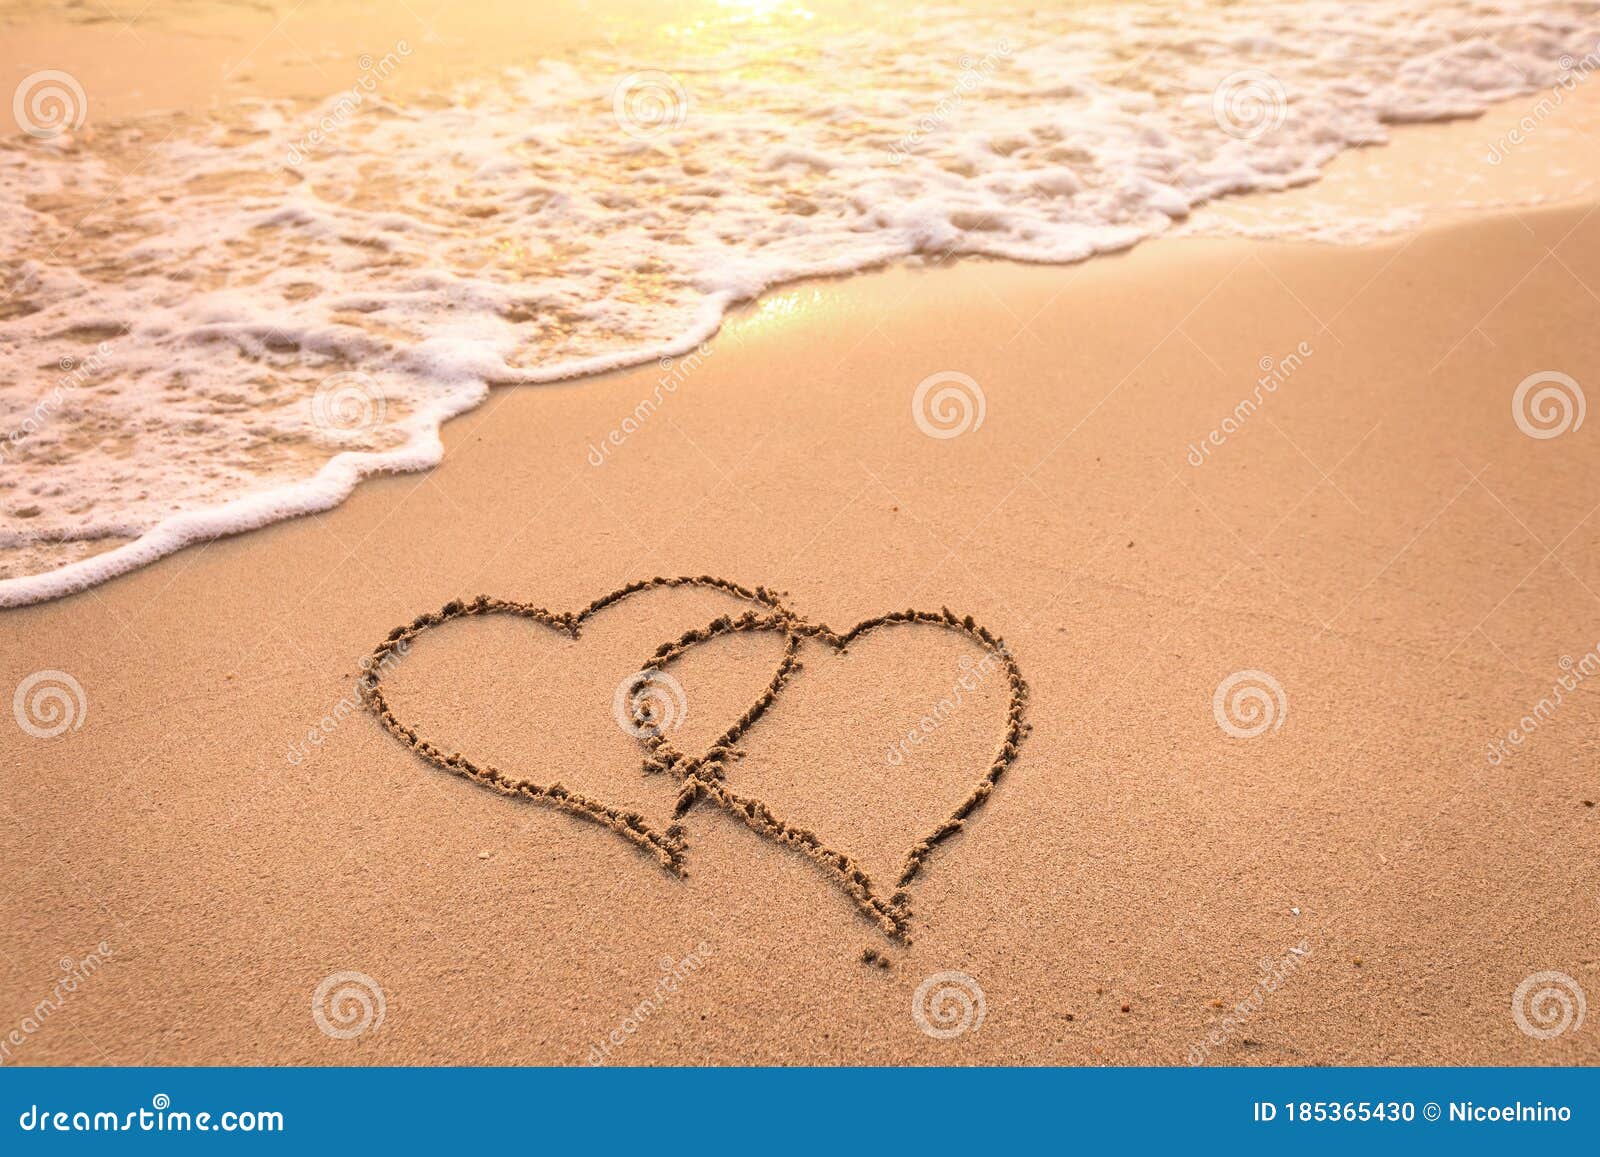 romantic honeymoon holiday or valentine`s day on the beach concept with two hearts drawn on the sand, tropical getaway for couple